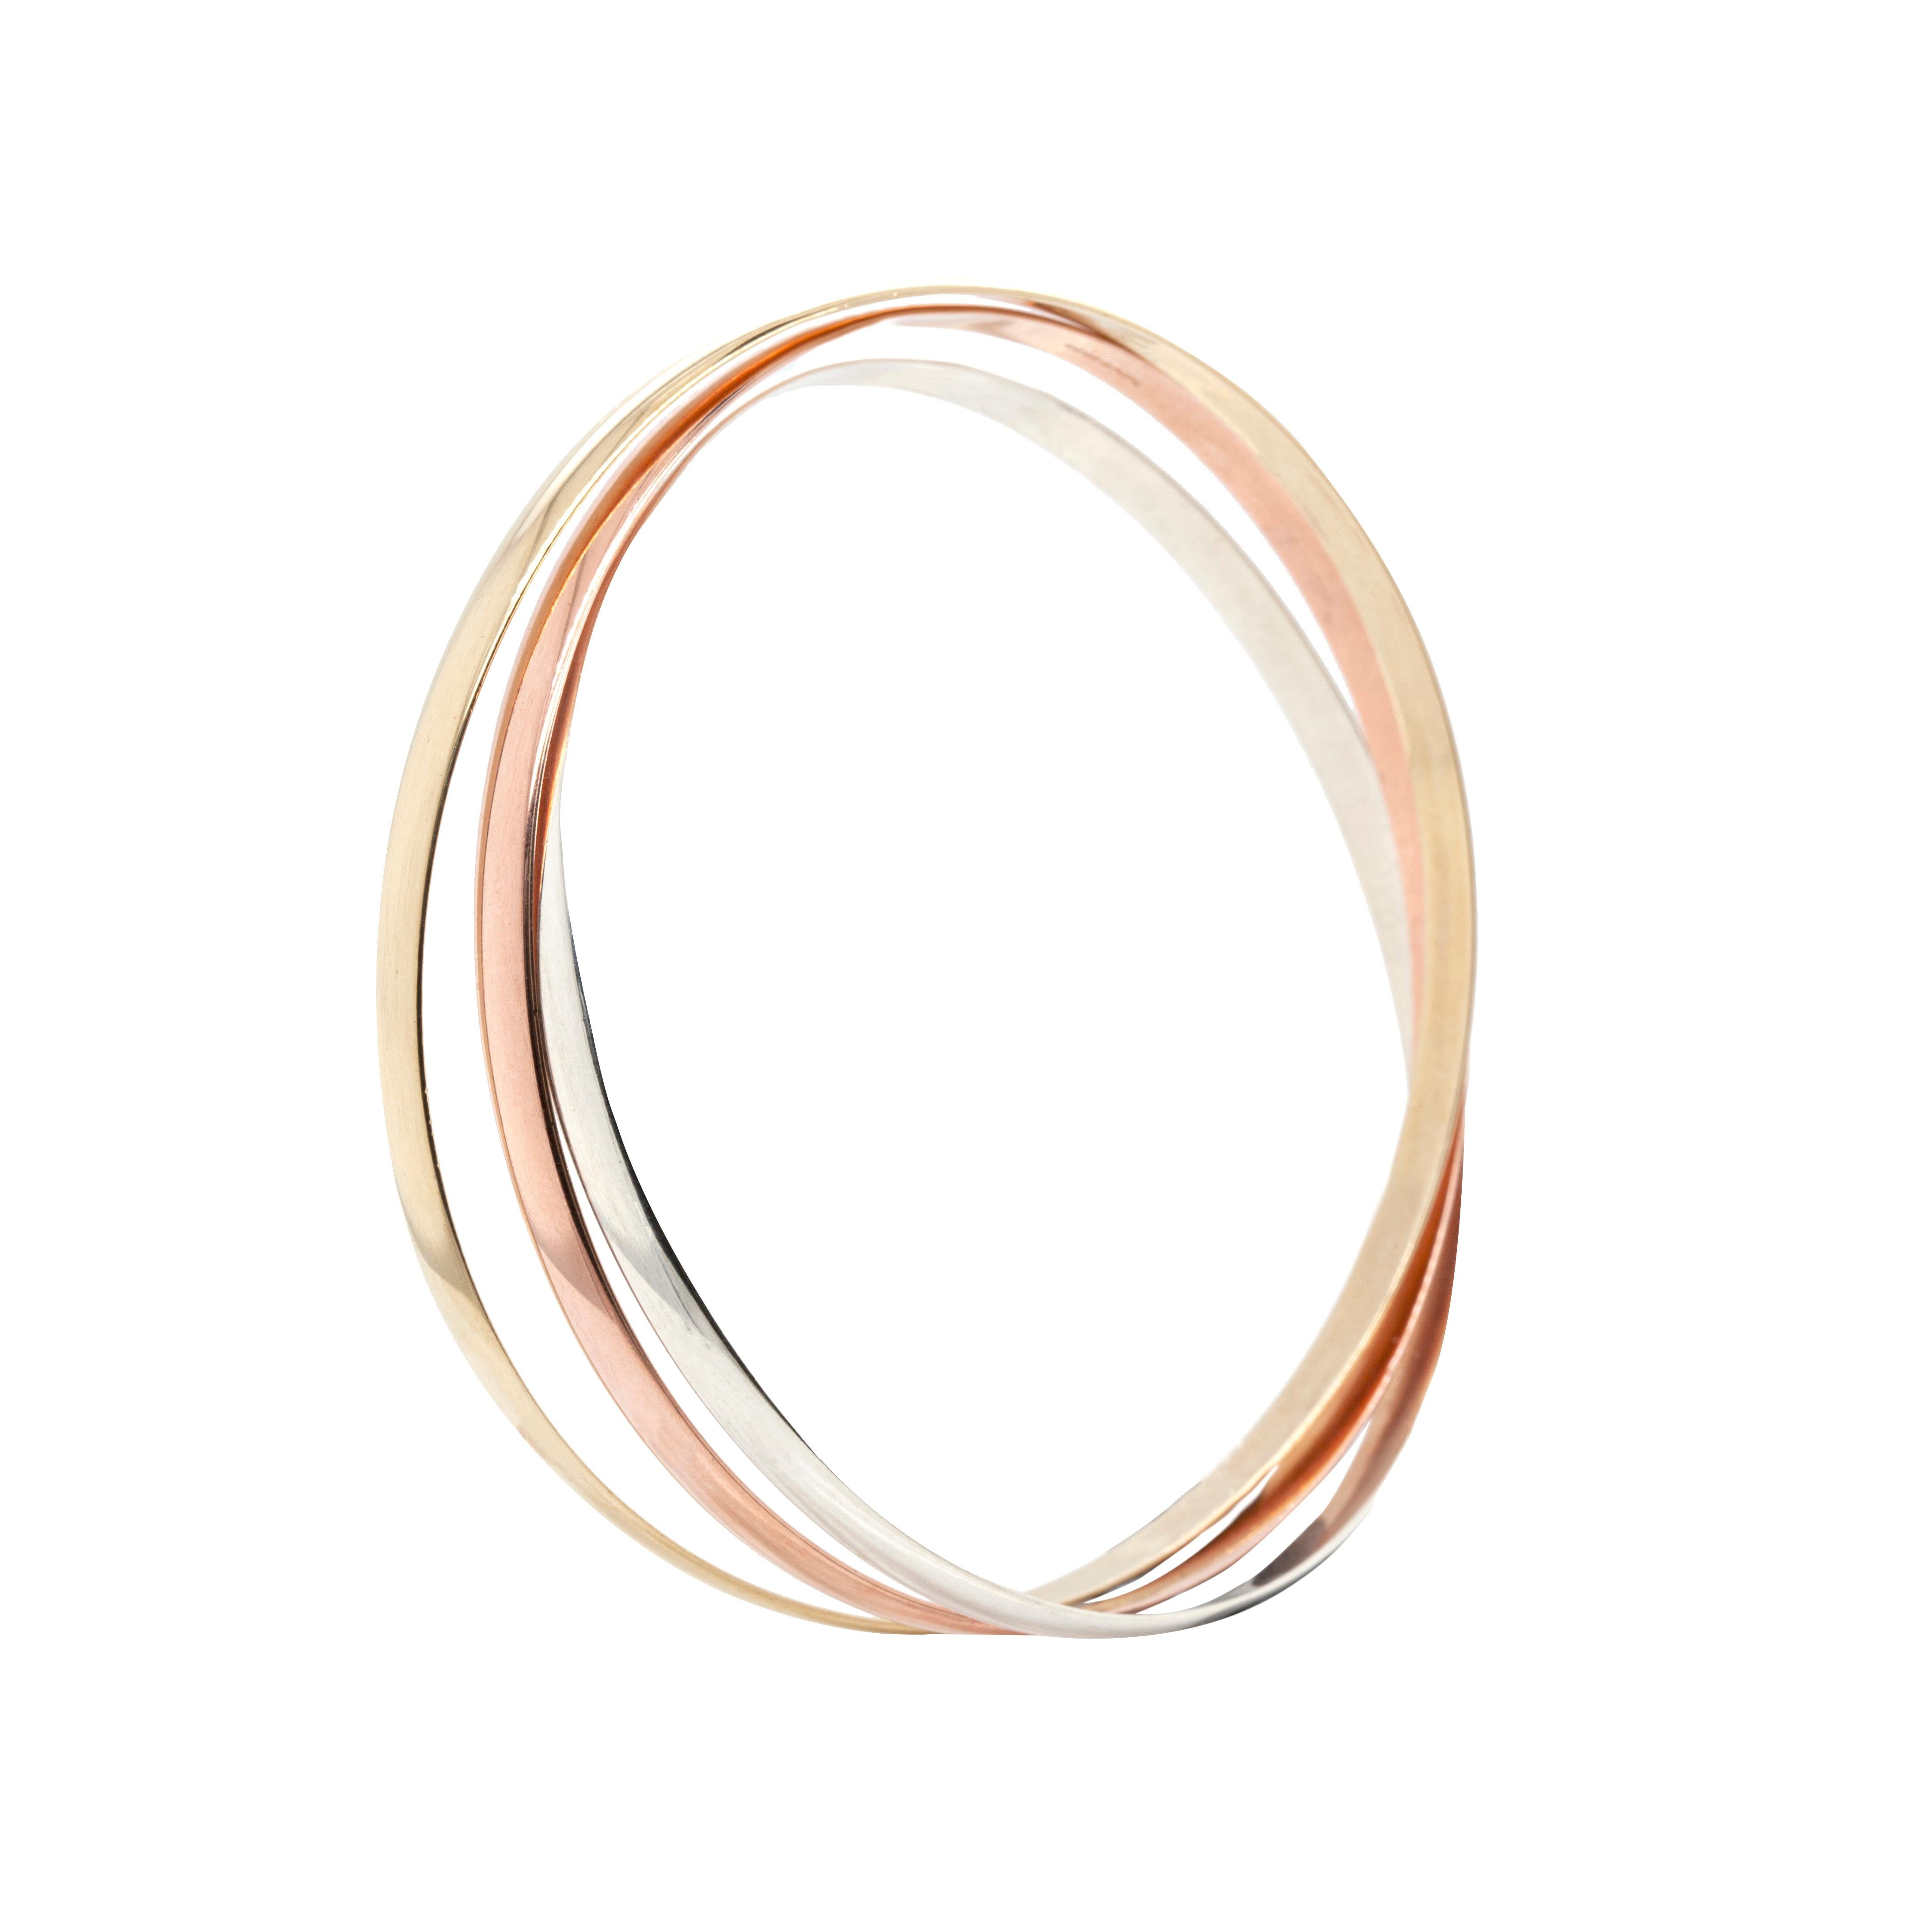 This gorgeous three-tone Russian Wedding Bangle is the perfect piece that goes with absolutely everything. Combining beautiful rose, yellow and white nine carat gold, it is an elegant and timeless design.

Three bangles, each with a height of 4mm,